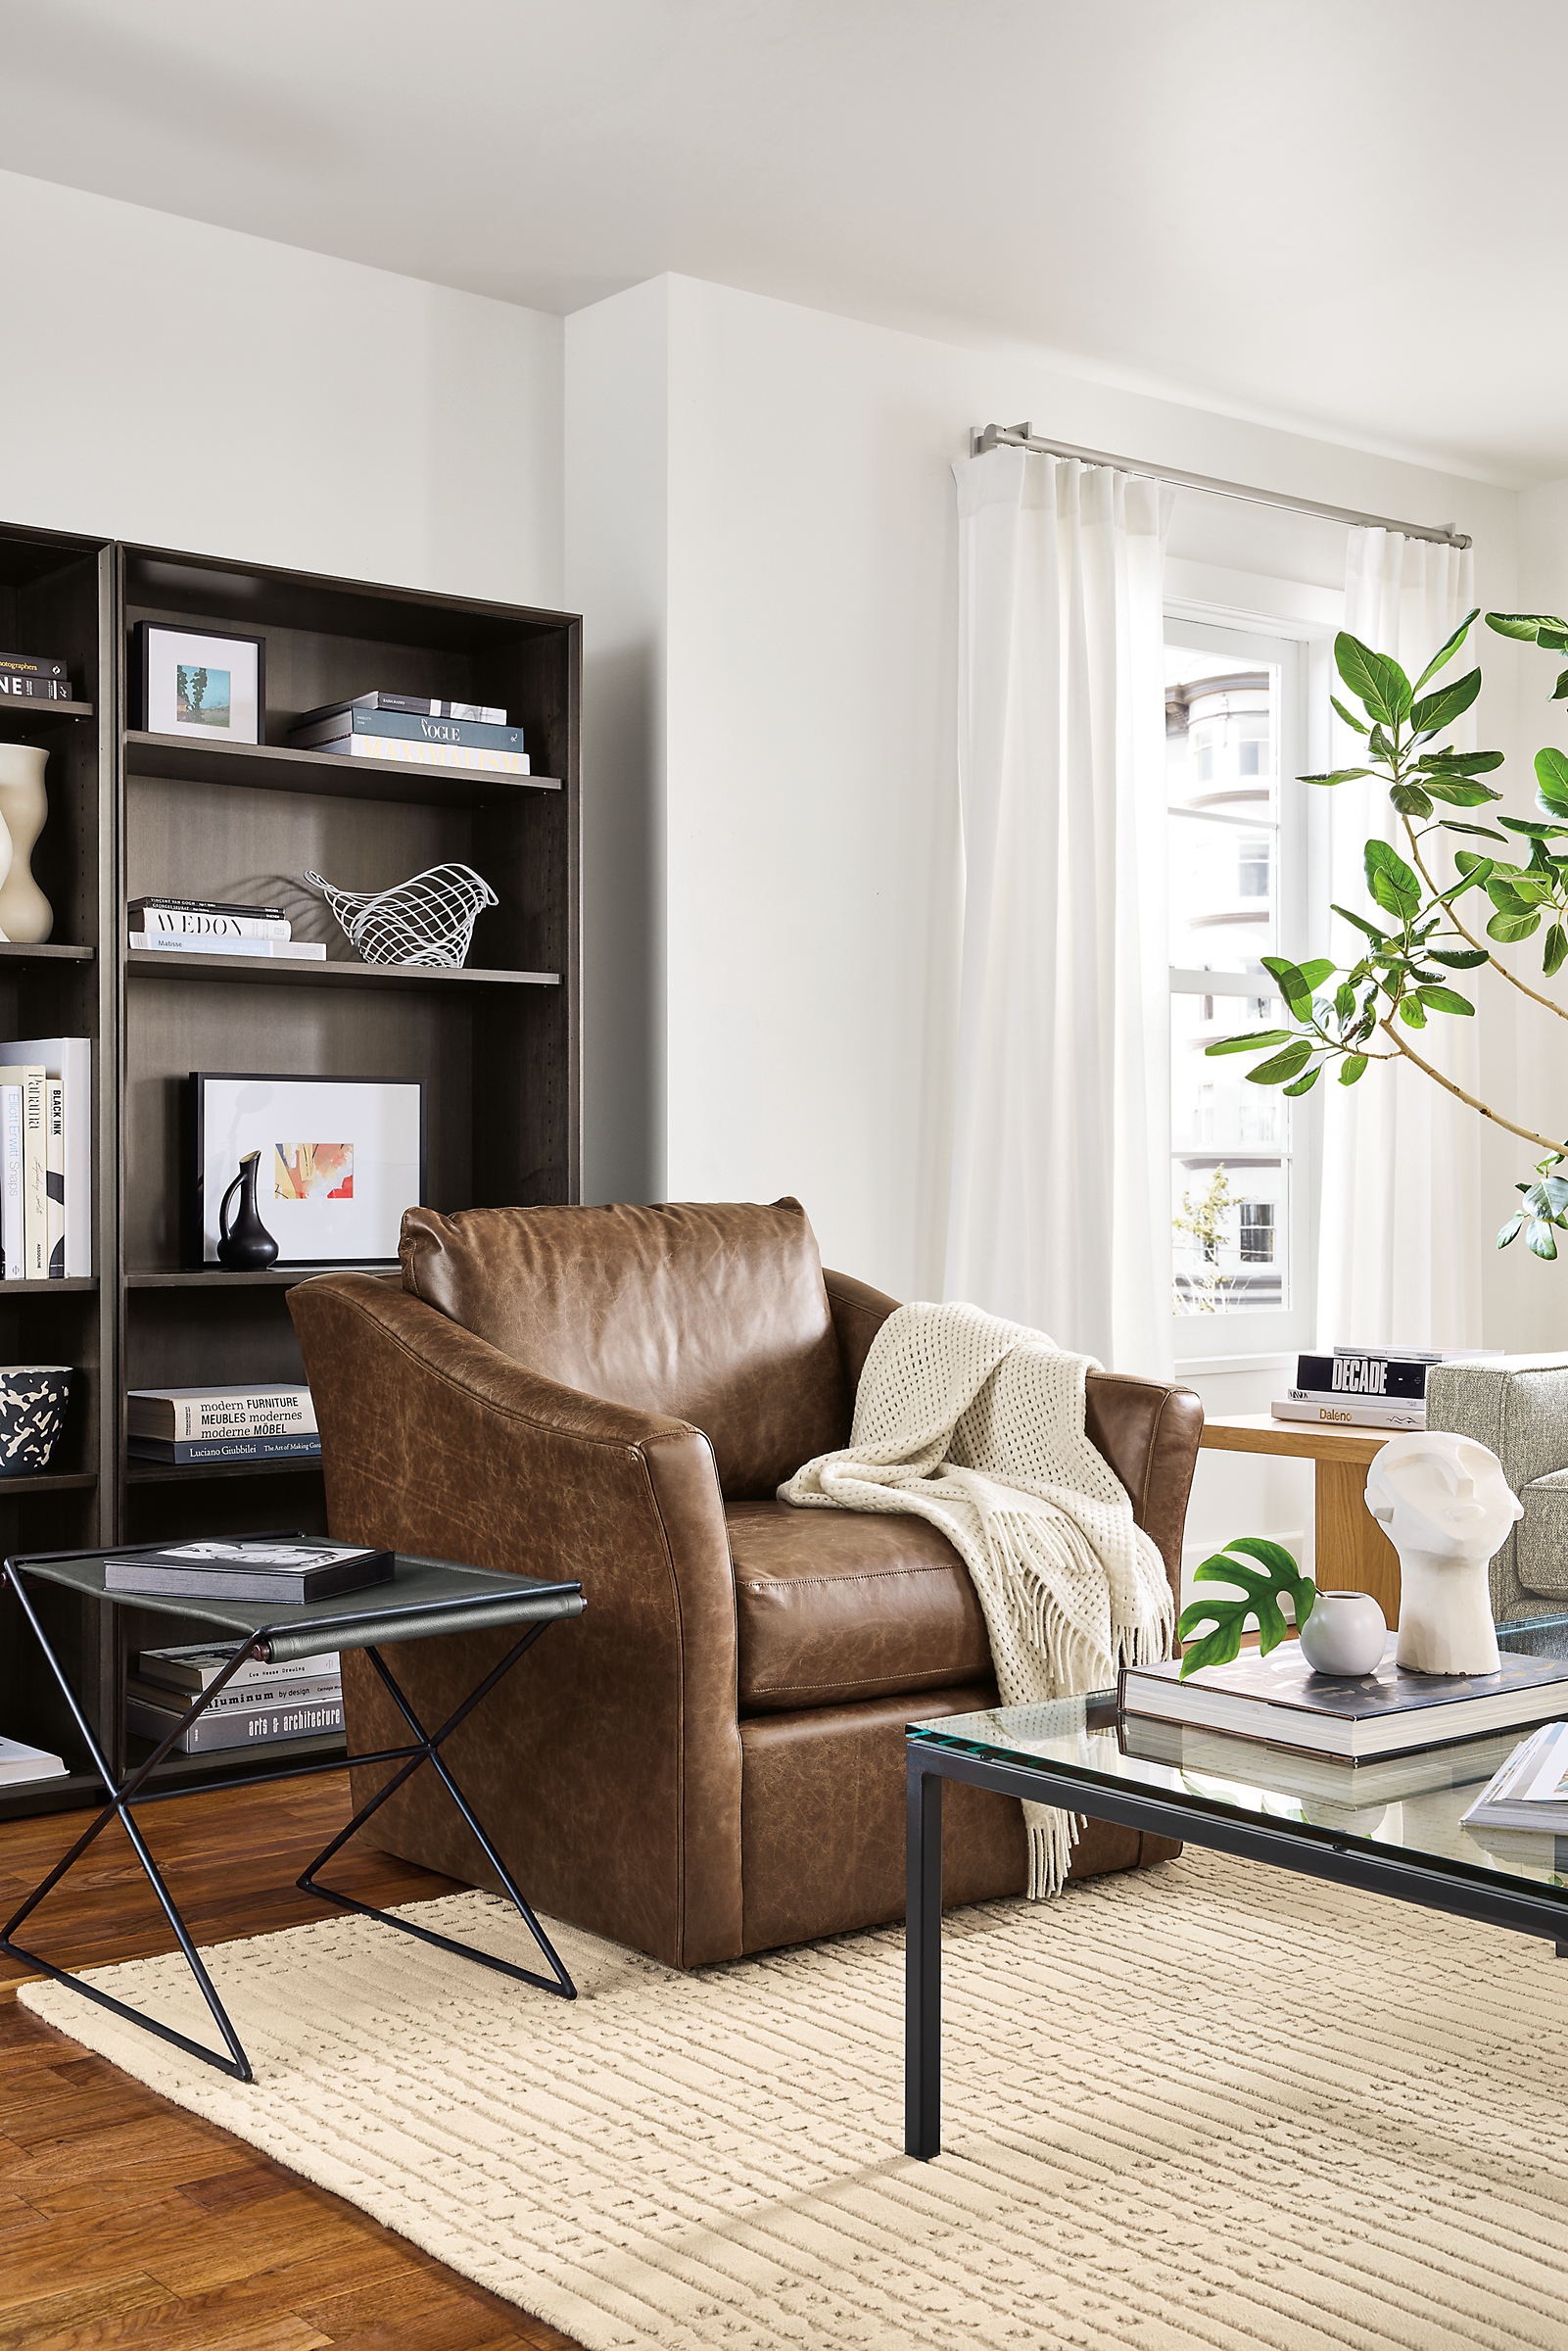 Living room with Maeve swivel chair in bourbon leather, tavi stool in black leather and rollins bookcases in charcoal.